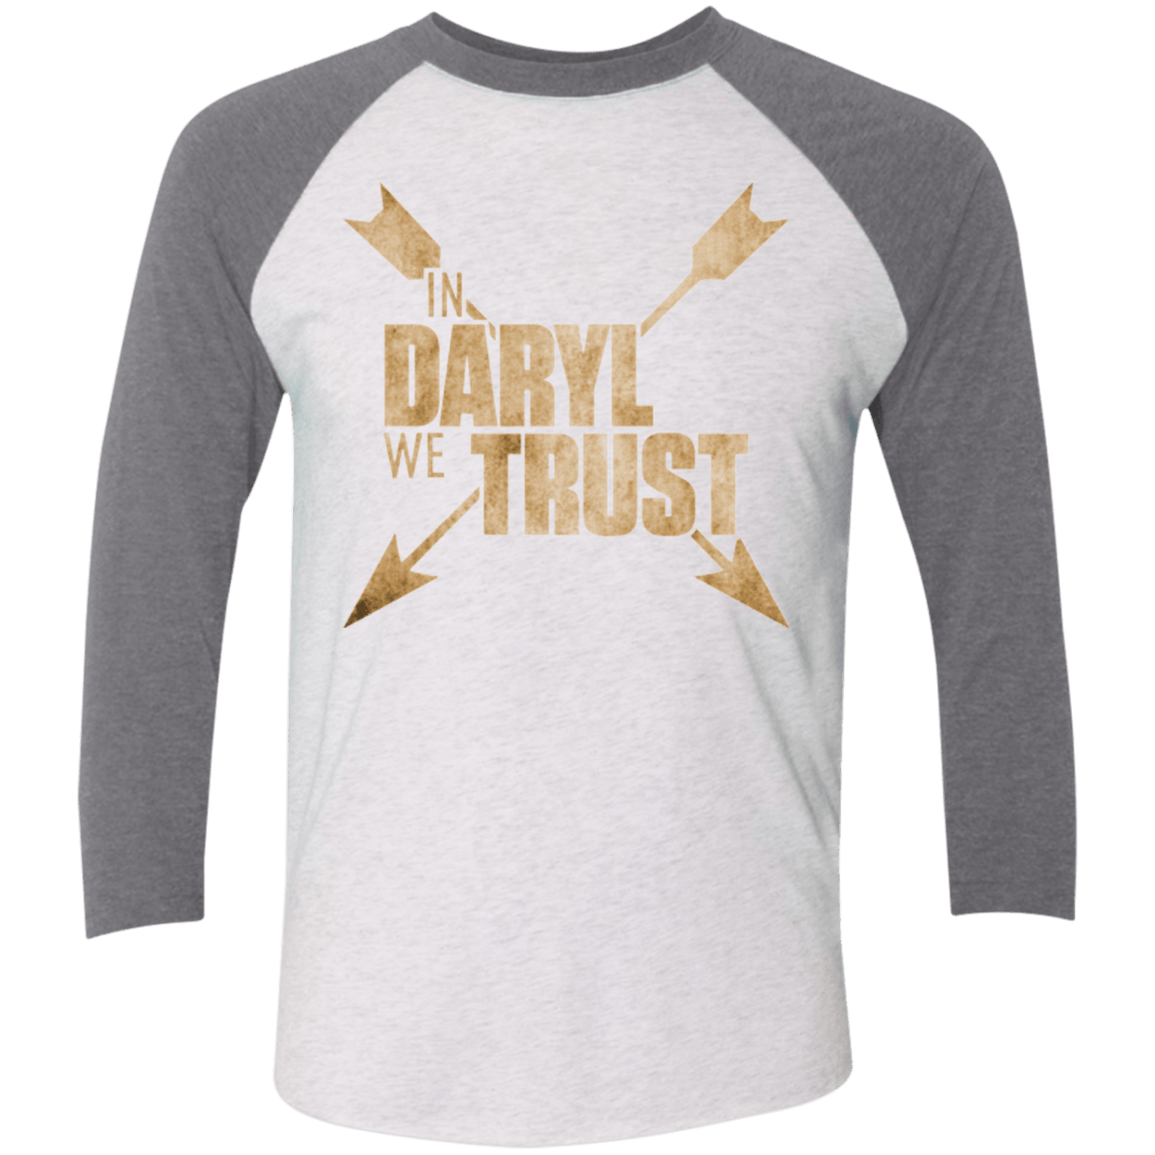 T-Shirts Heather White/Premium Heather / X-Small In Daryl We Trust Triblend 3/4 Sleeve